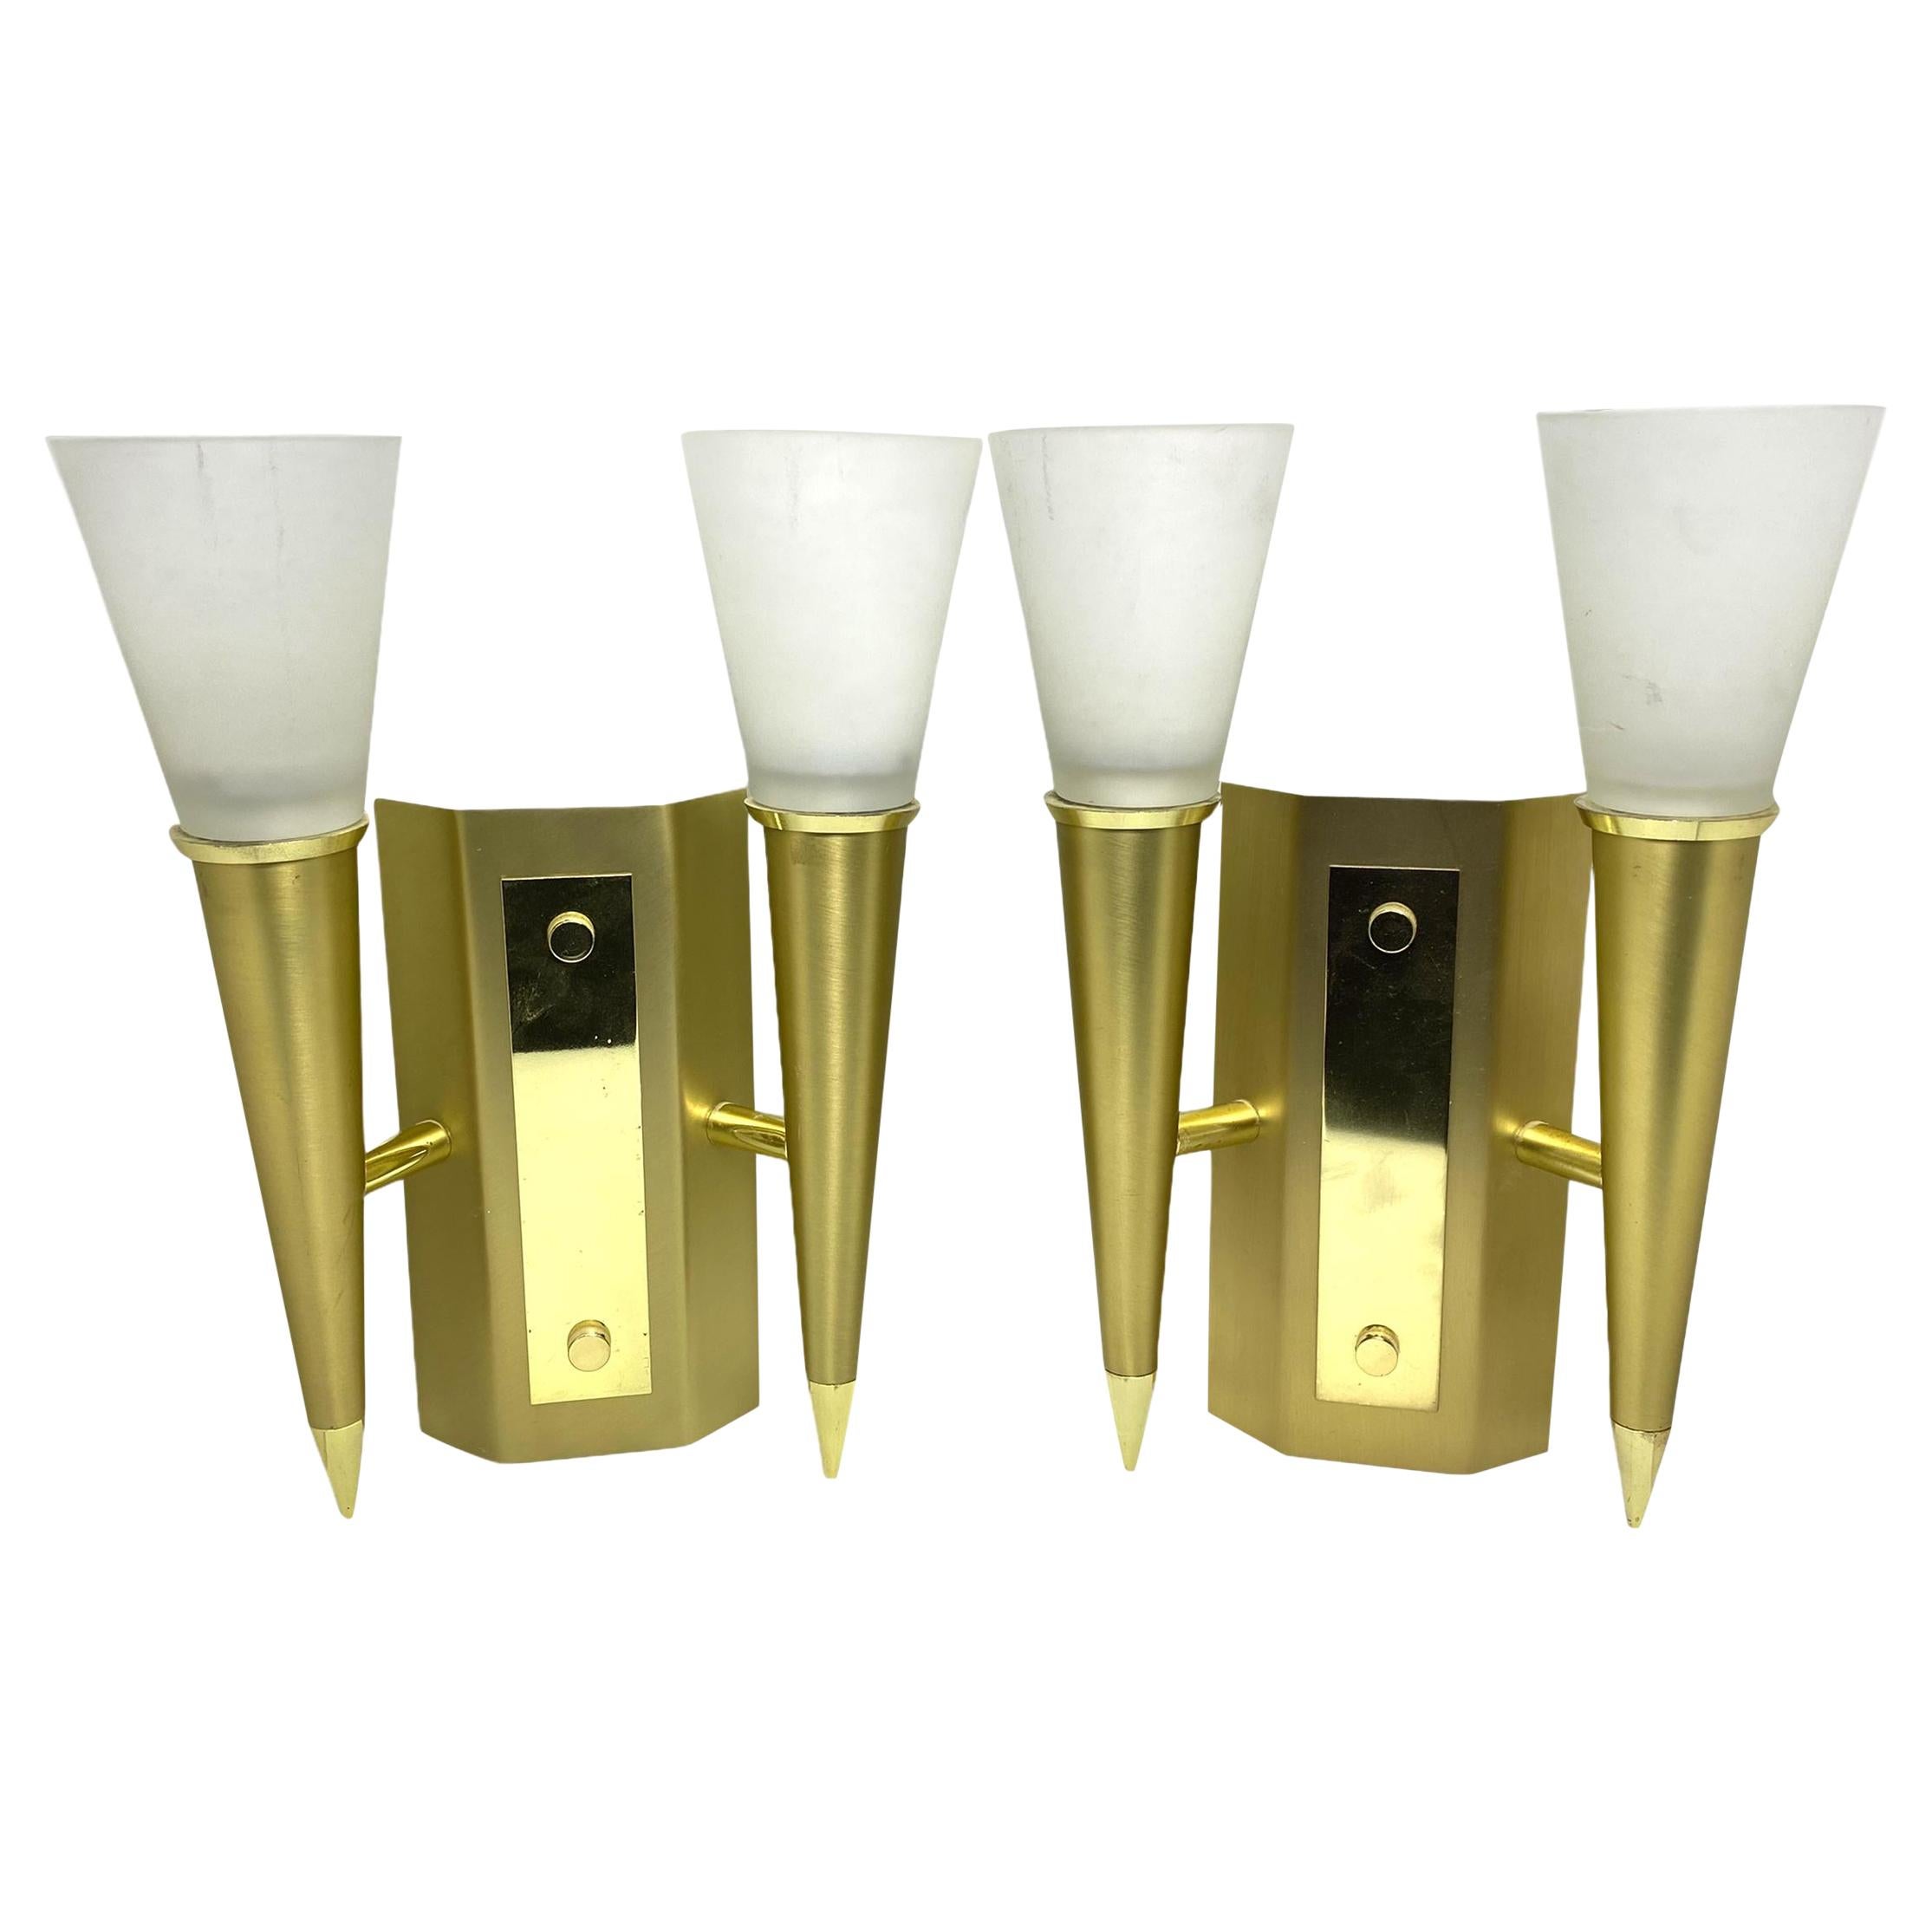 Pair of Art Deco Style Torch Wall Sconces in Brass and Satin Glass Germany 1980s